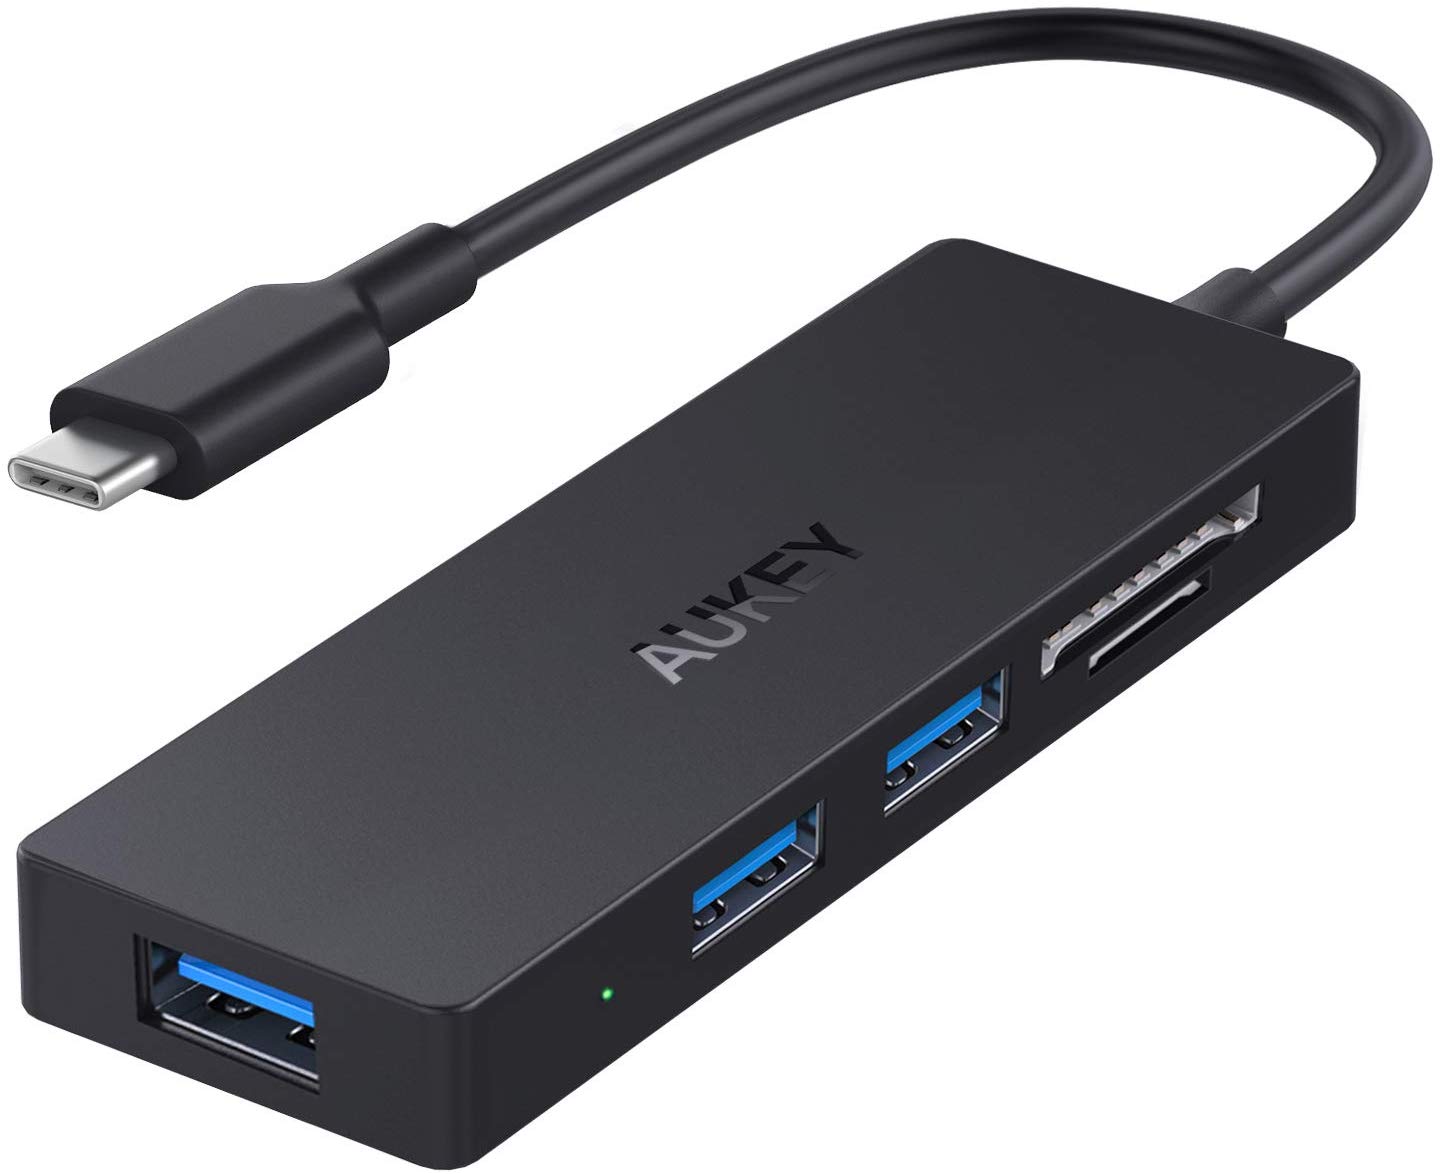  USB C Hub AUKEY 5 in 1 USB Type C Adapter with SD/TF Card Reader & 3 USB 3.0 Ports